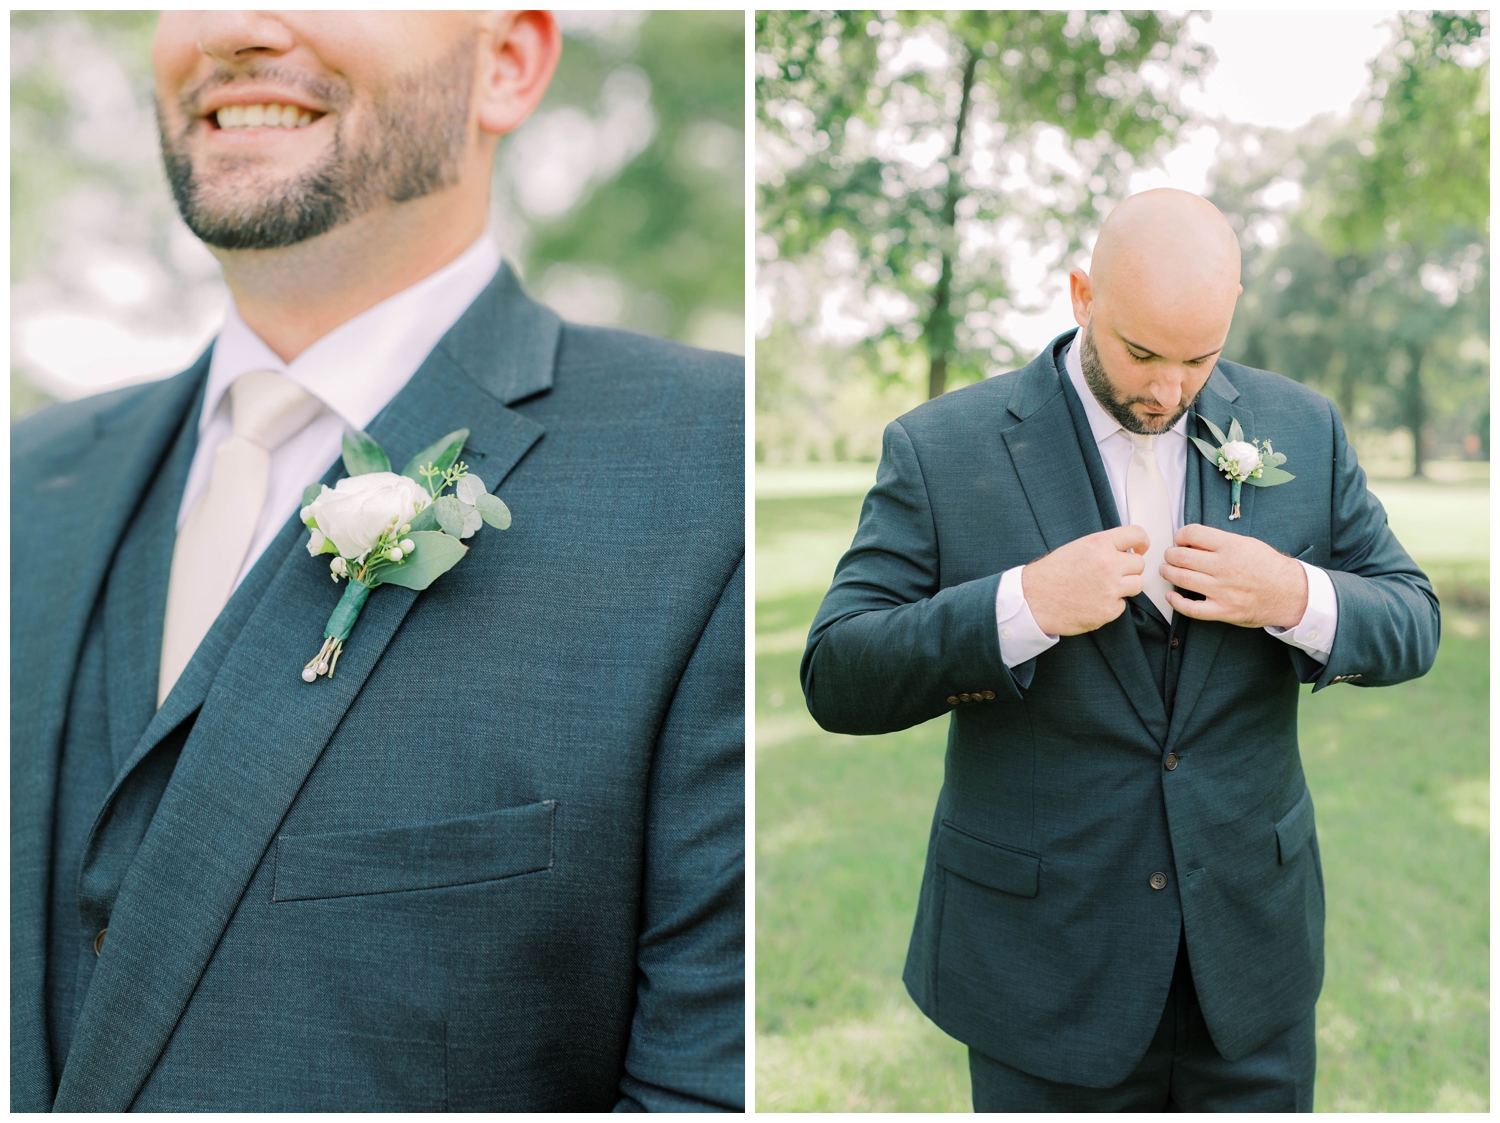 portrait-of-a-groom-buttoning-his-jacket-on-wedding-day